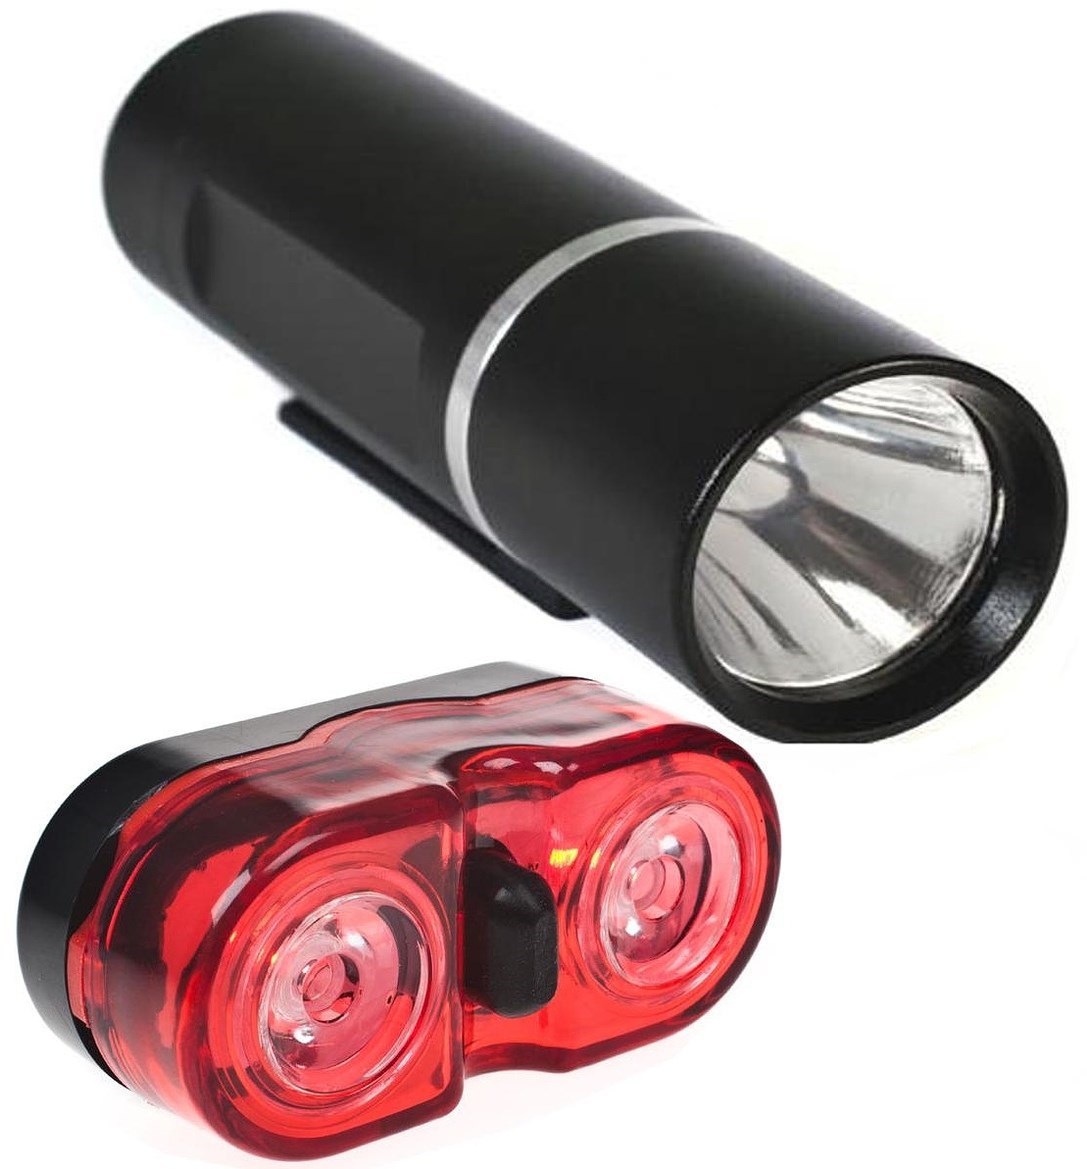 Raleigh RX8.0 Front and Rear Light Set product image